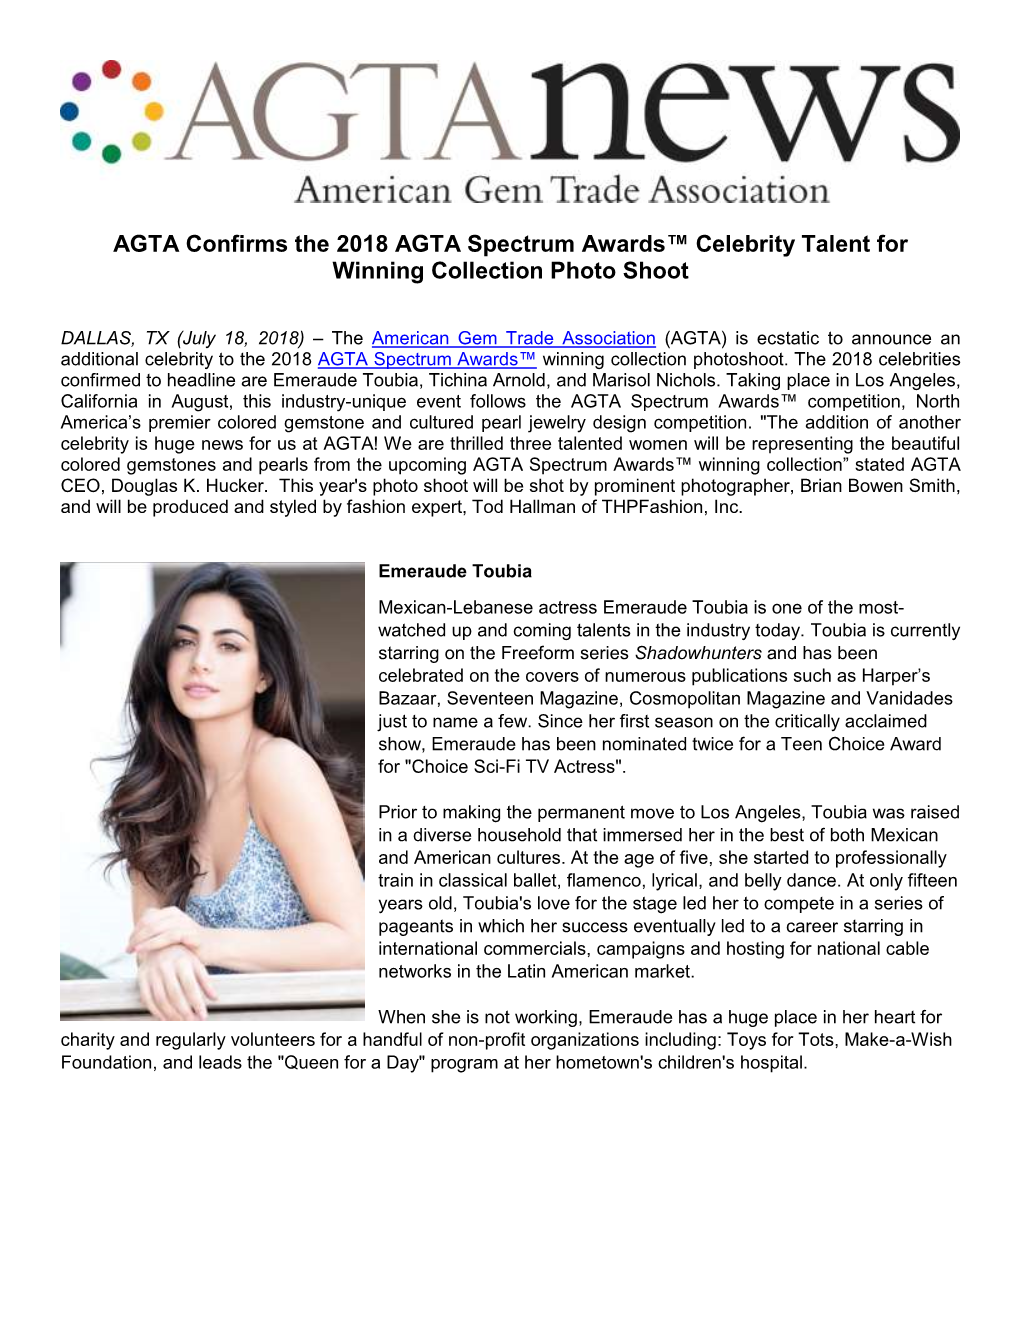 AGTA Confirms the 2018 AGTA Spectrum Awards™ Celebrity Talent for Winning Collection Photo Shoot